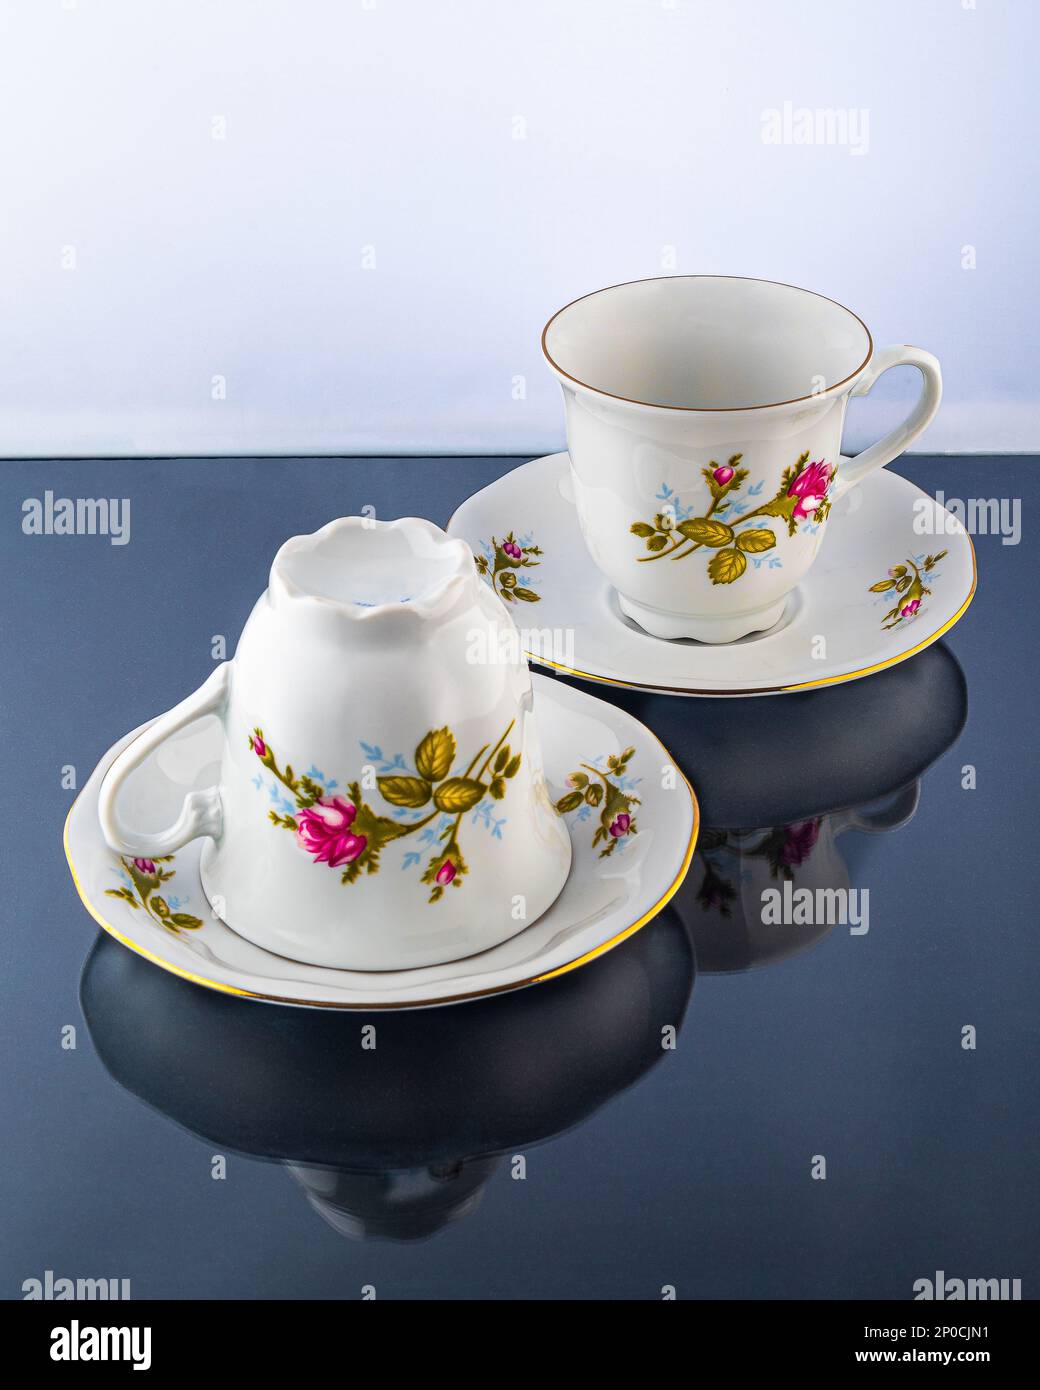 Porcelain tableware, coffee or tea cup. Hand painted flowers. Can be used to illustrate porcelain in newspaper. Stock Photo